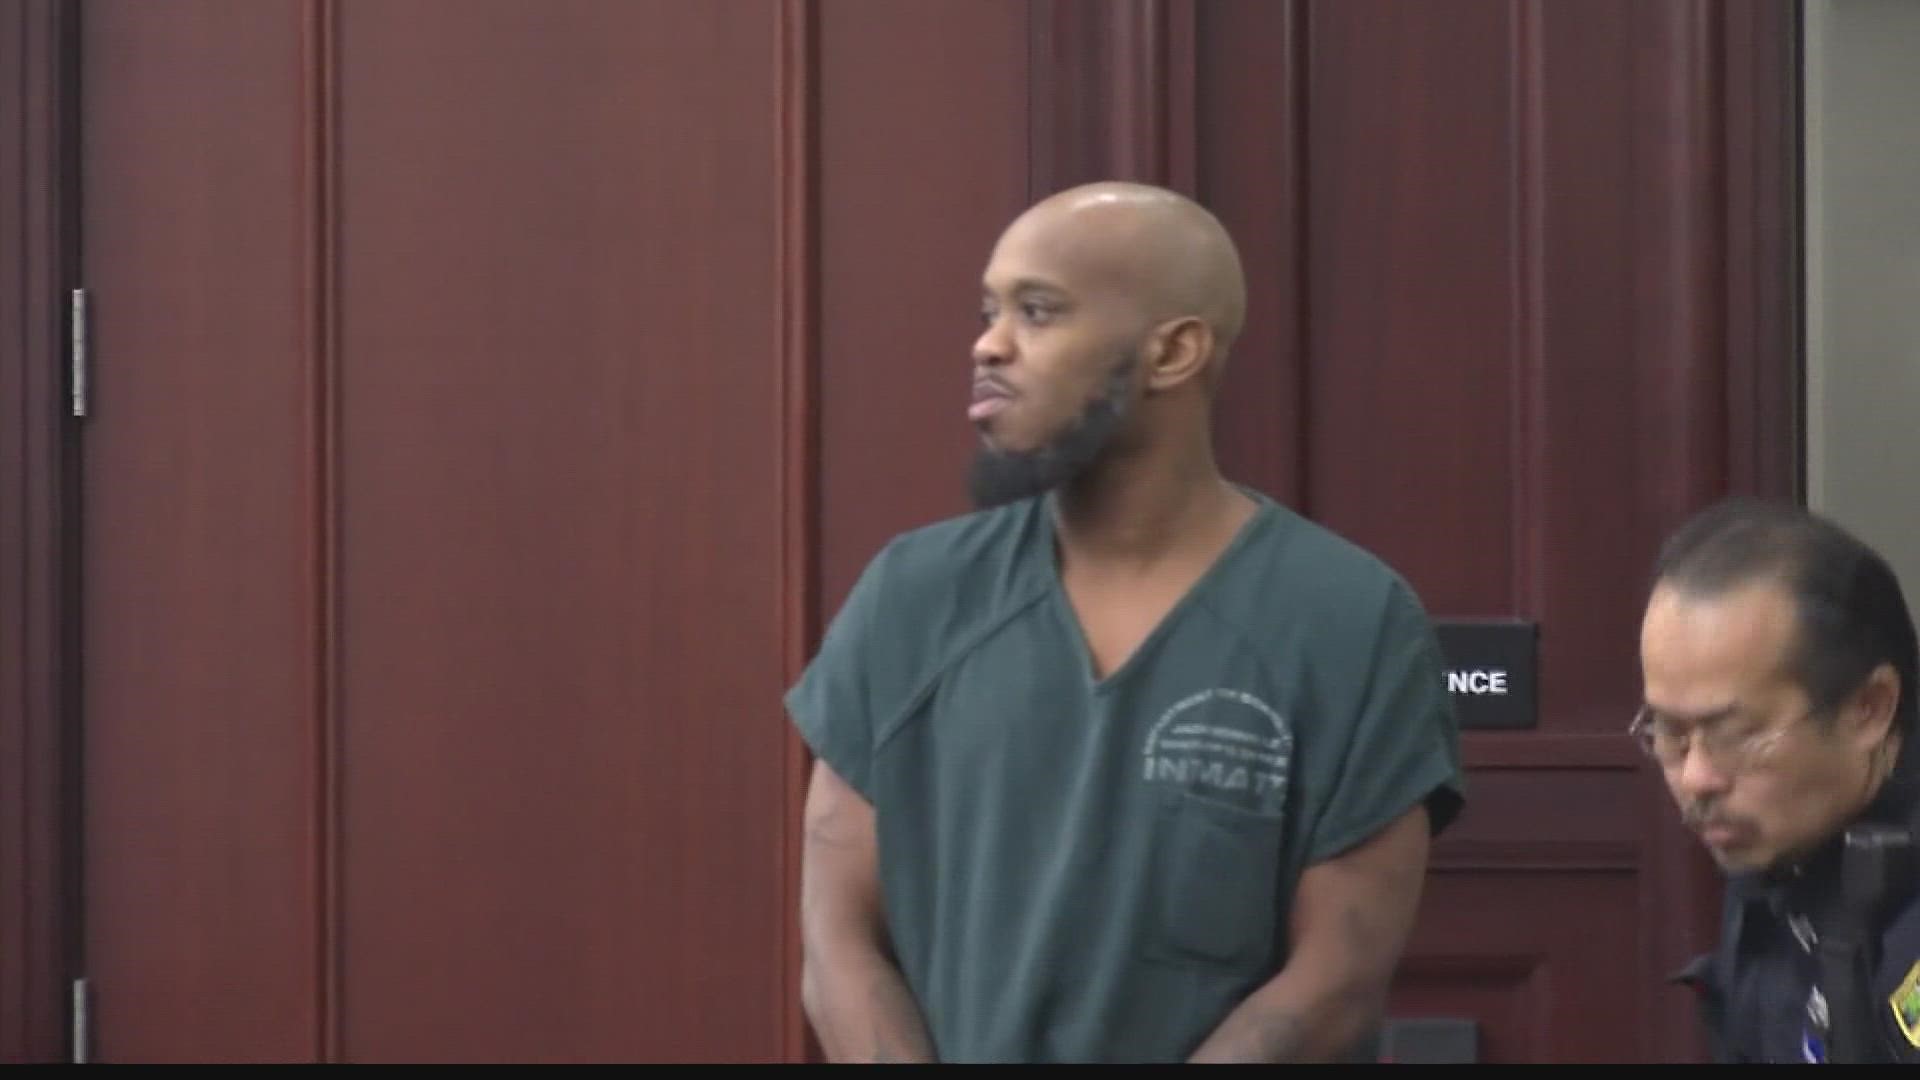 Terrell Lewis appeared in court pleading not guilty to the fourth and most recent murder charge he faces.